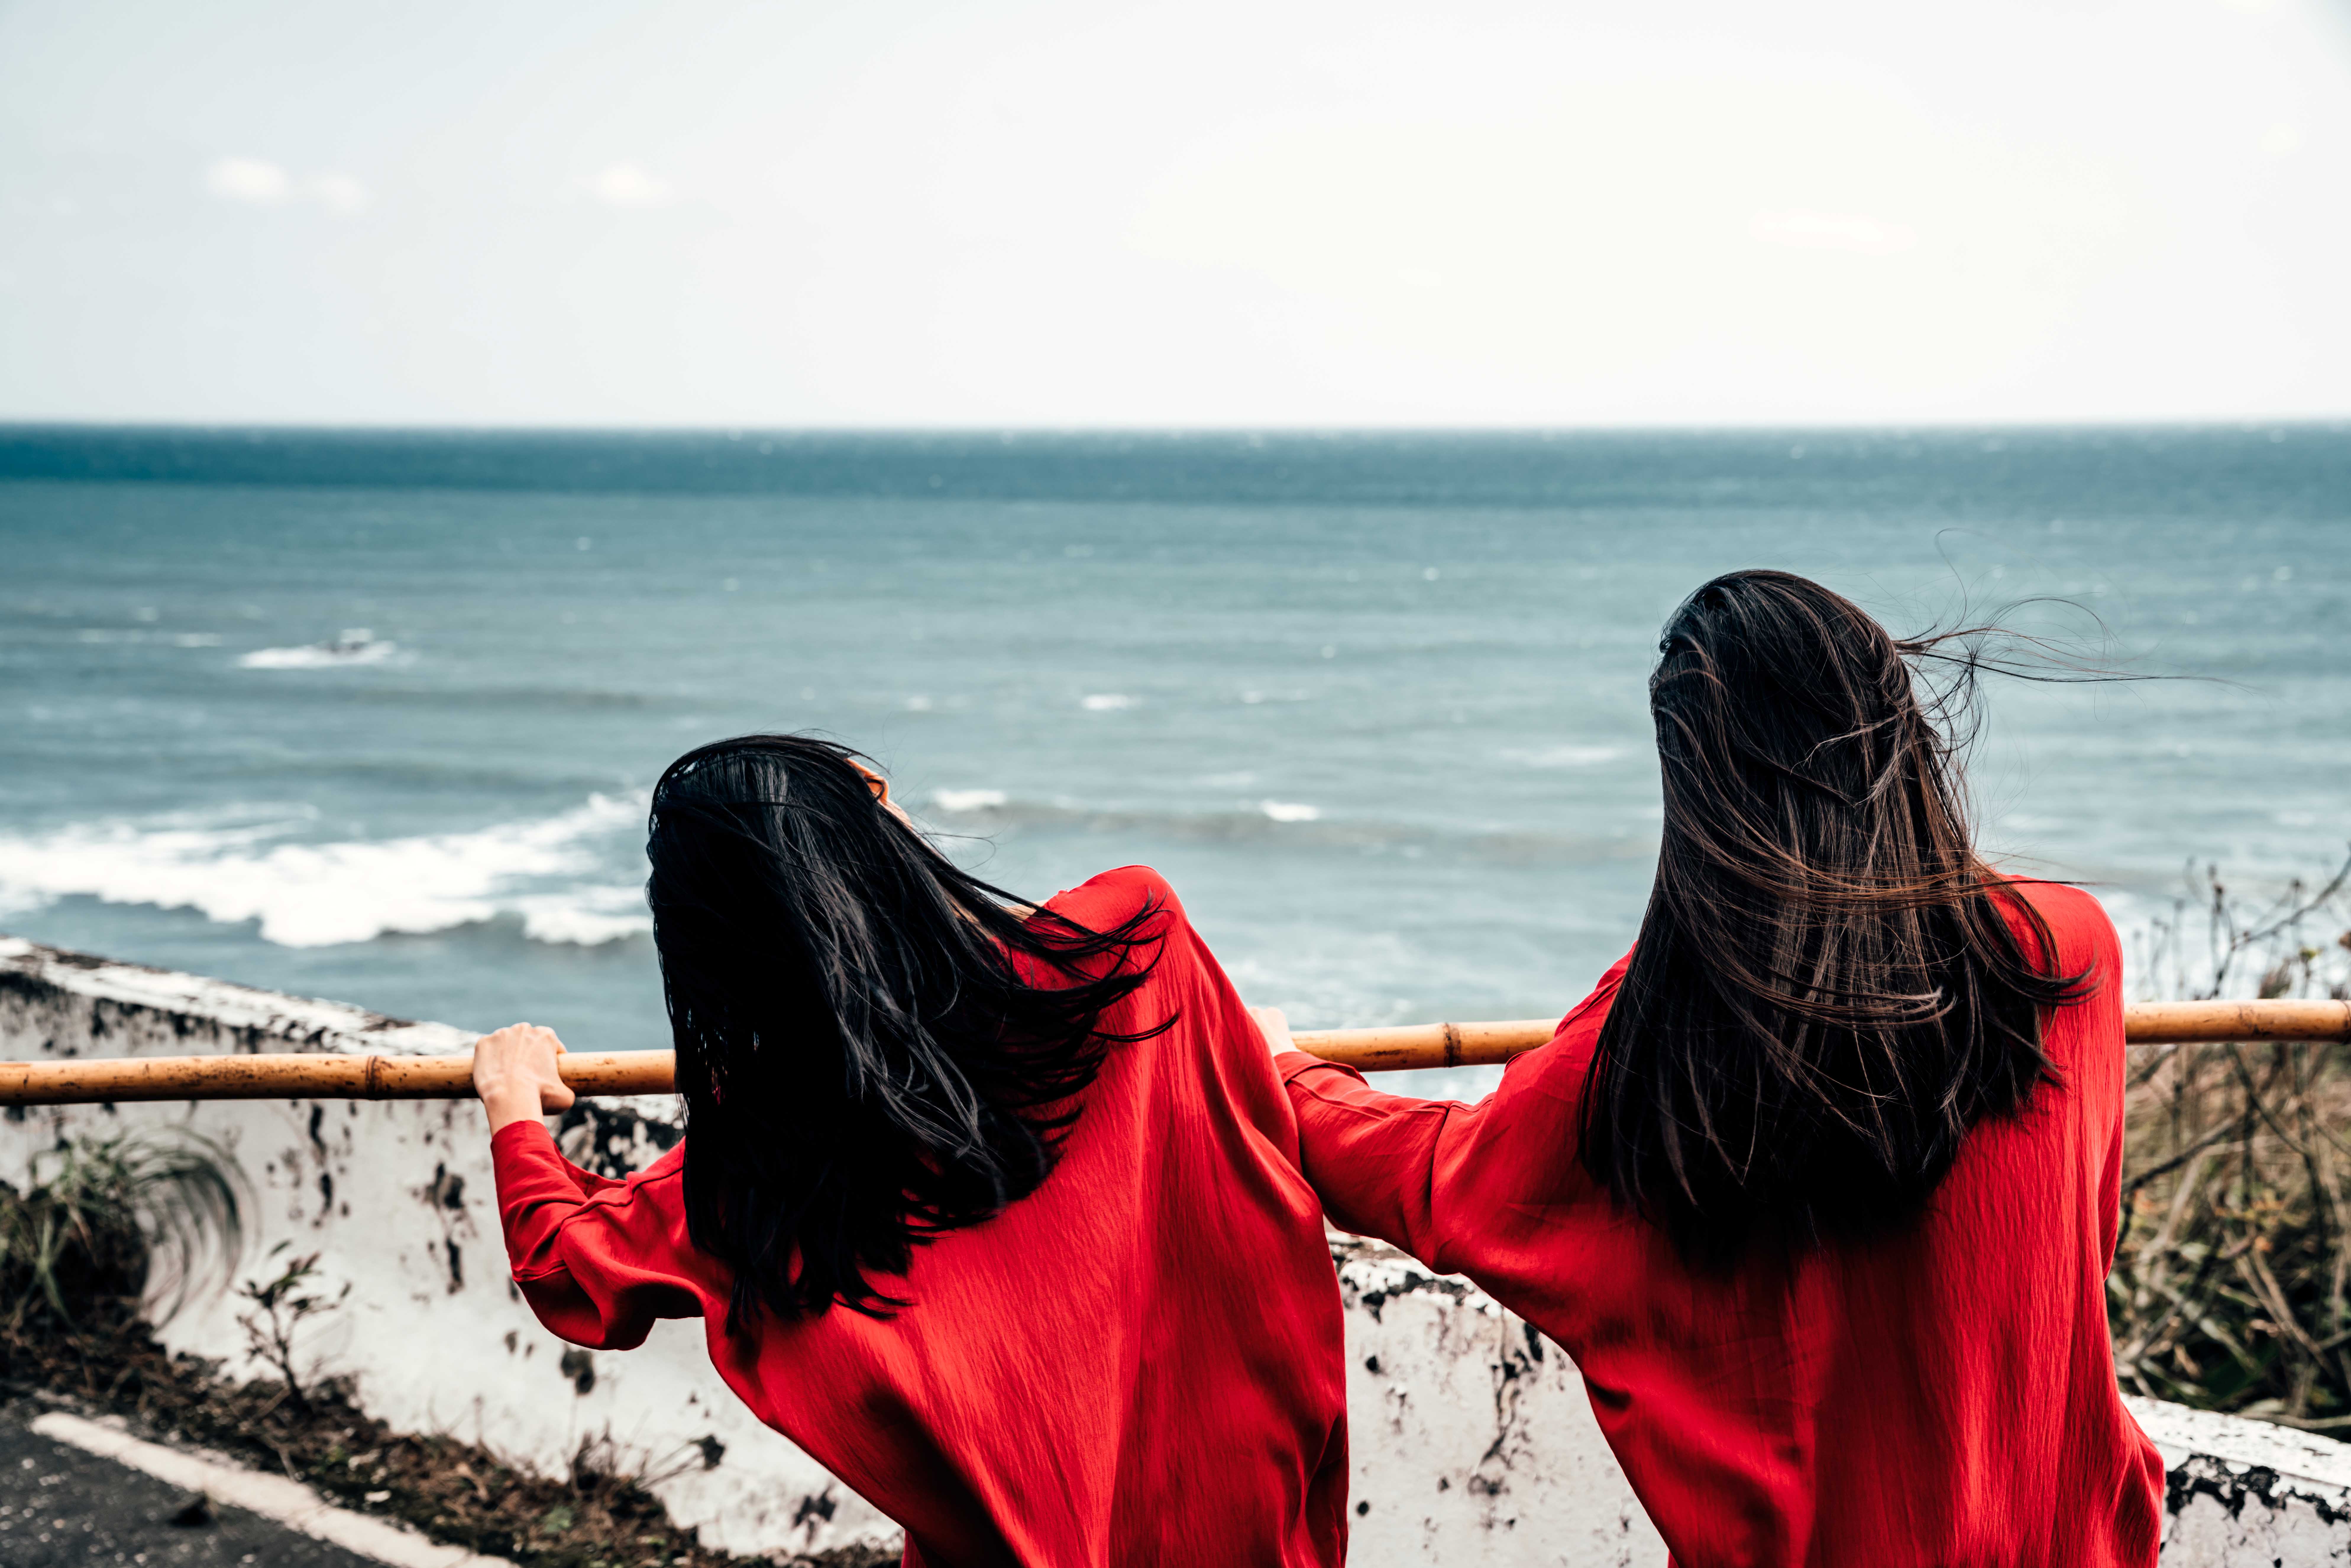 Two people with long black hair blowing in a sea breeze, their backs to the camera, both dressed in vibrant red, both holding onto a long piece of bamboo that dissects the whole frame. In the background, a white concrete wall and the sea.